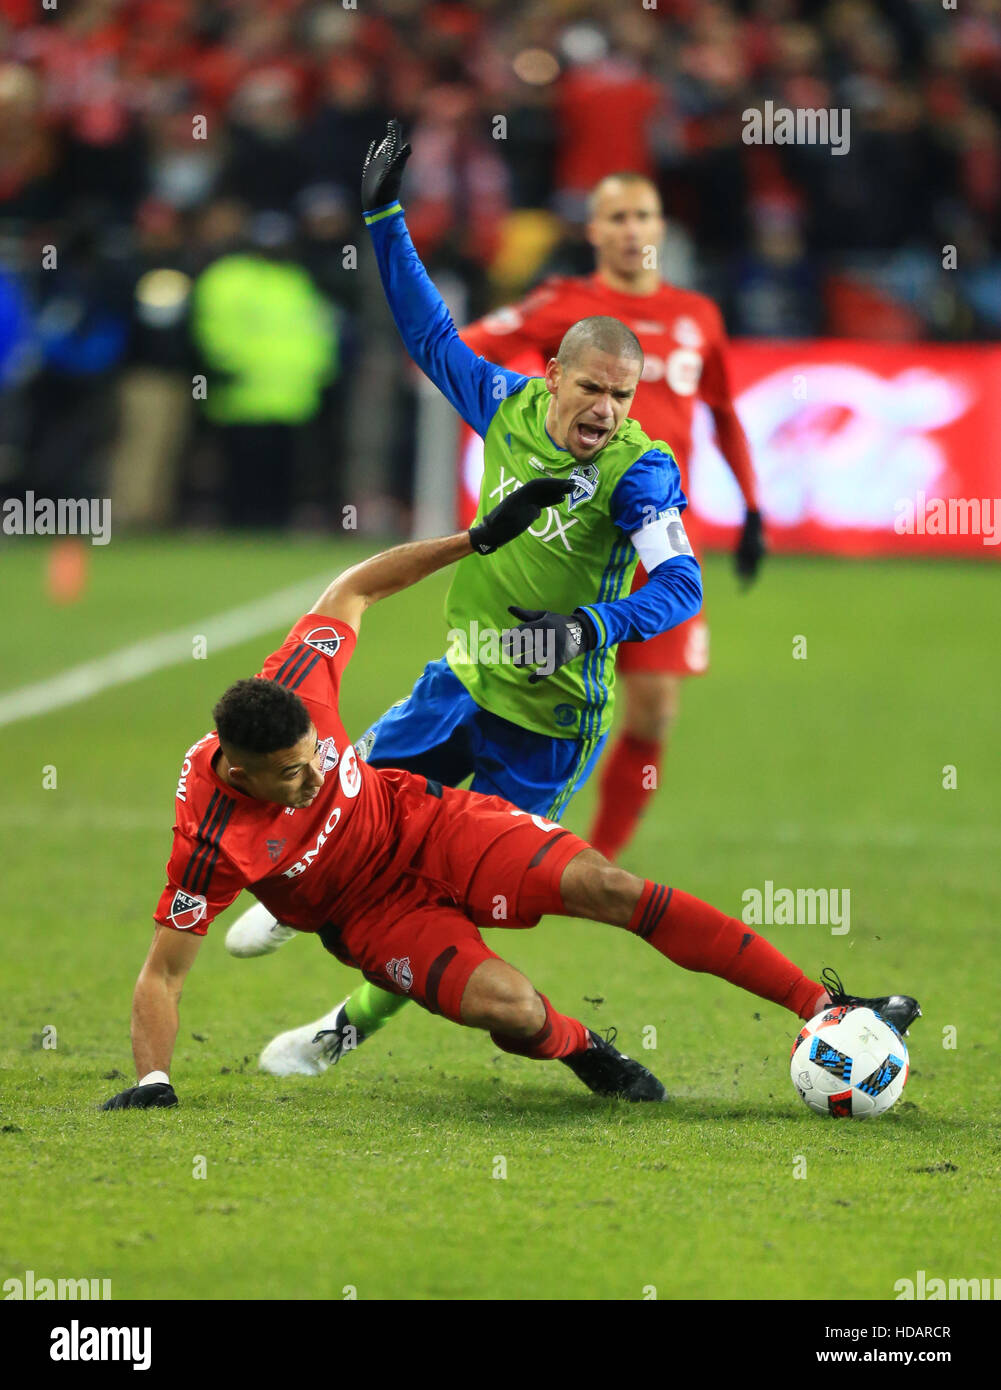 Toronto, Canada. 10th Dec, 2016. Osvaldo Alonso (C) of Seattle Sounders FC vies with Drew Moor of Toronto FC during their 2016 Major League Soccer (MLS) Cup final in Toronto, Canada, Dec. 10, 2016. Seattle Sounders FC won 5-4 and claimed the title. © Zou Zheng/Xinhua/Alamy Live News Stock Photo